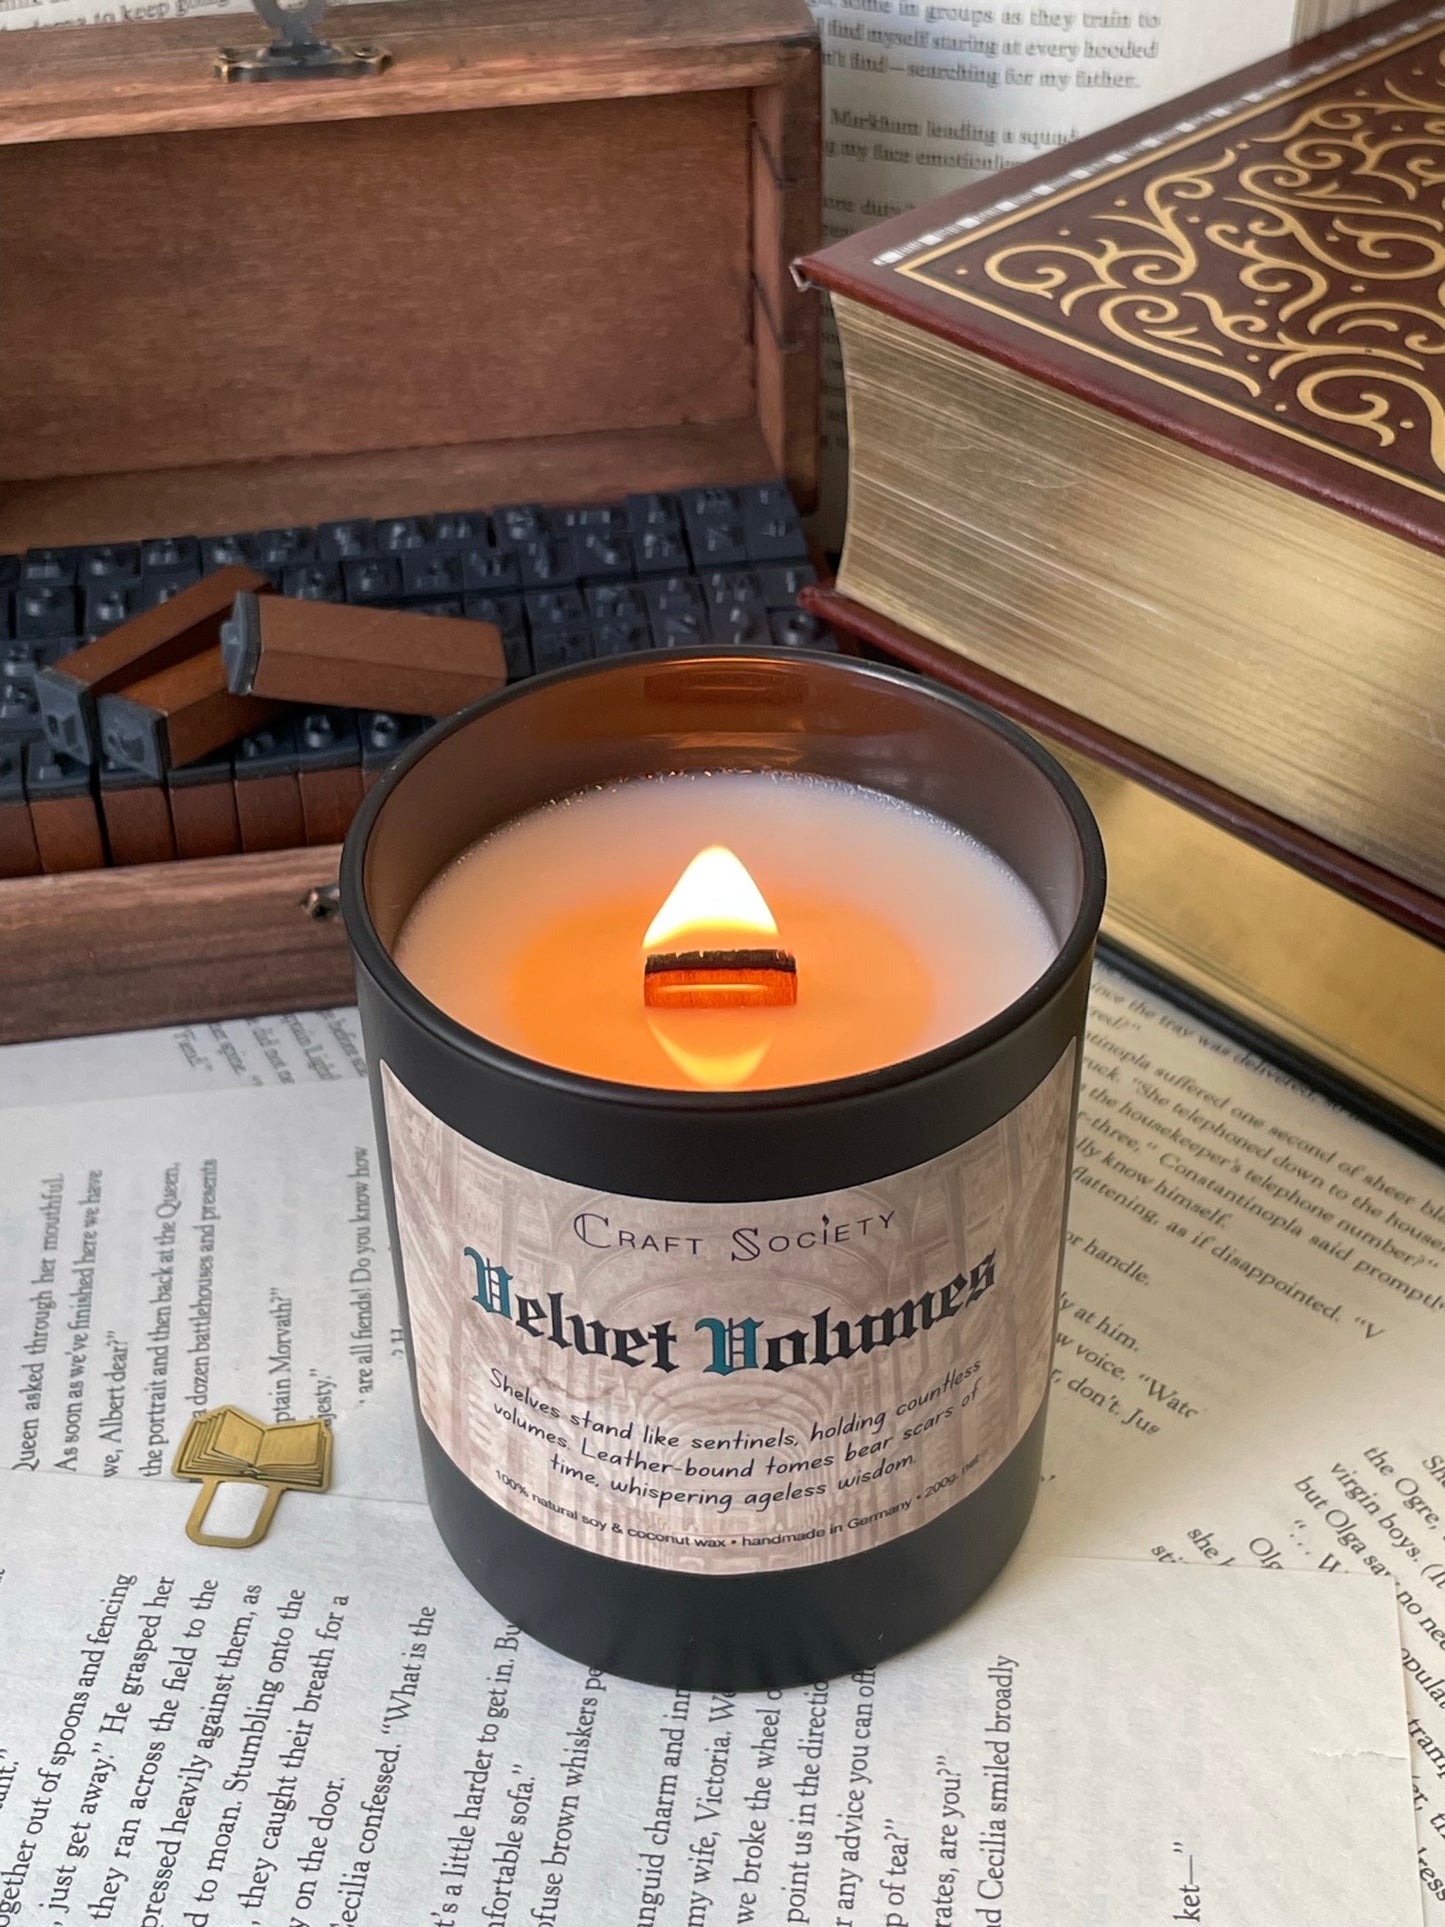 A burning deluxe scented candle in a black jar on a decorated background with books flowers and texts